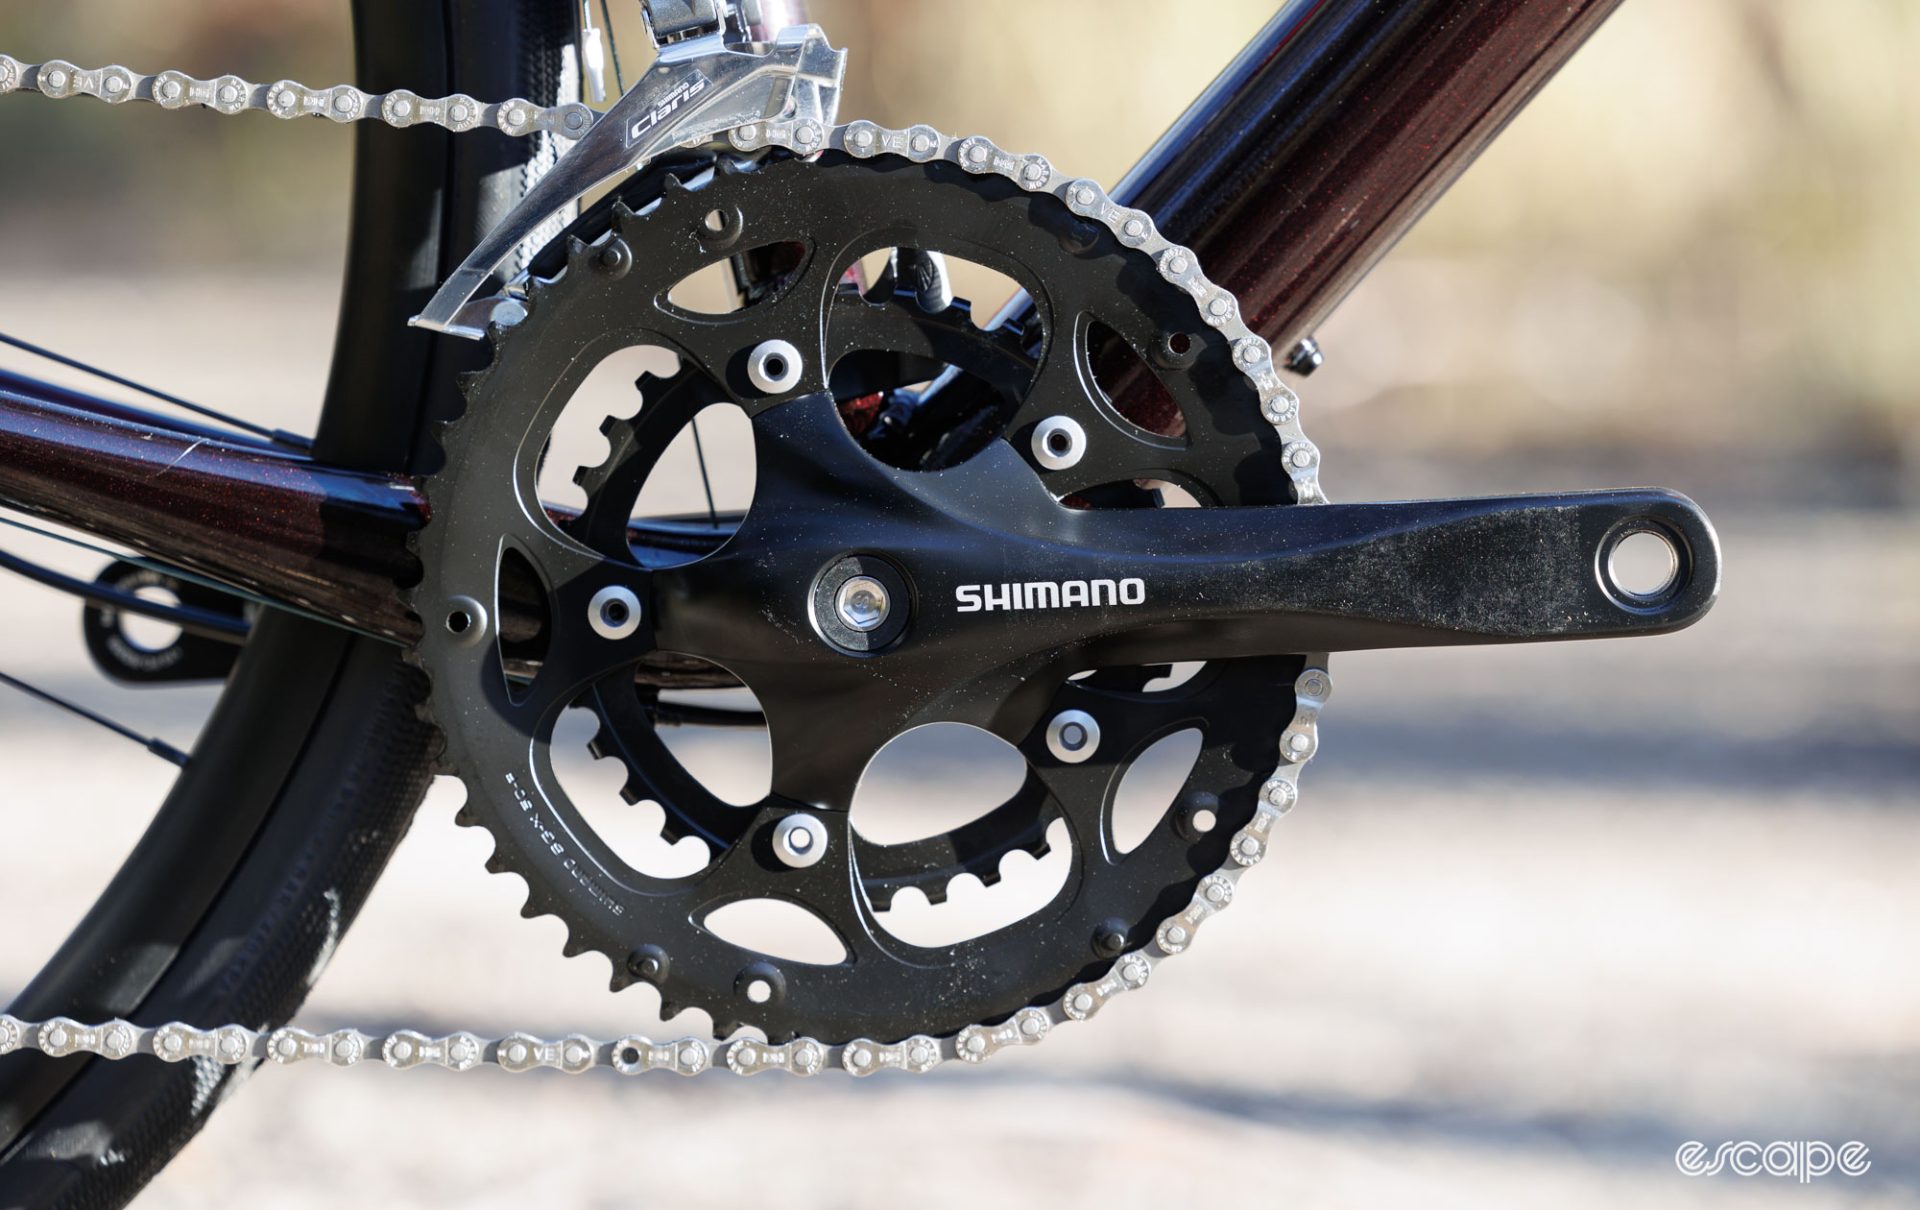 A view of the Shimano crankset. 